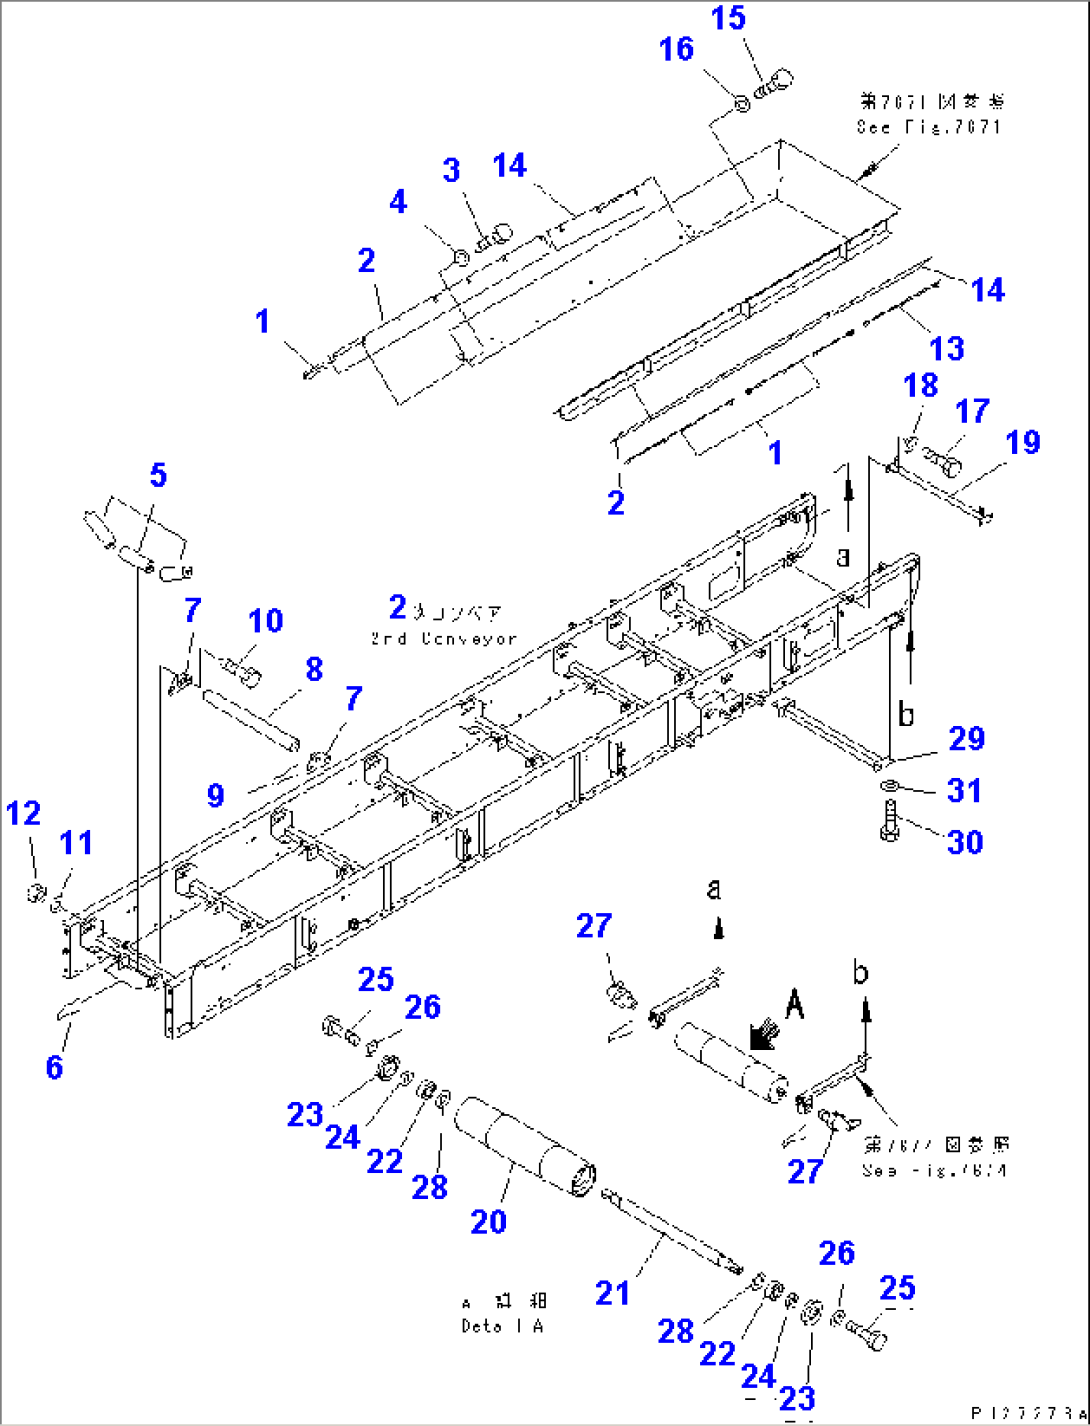 2ND CONVEYOR (INNER PARTS) (3/10) (450MM WIDTH) (WITH EMERGENCY SWITCH)(#1101-)